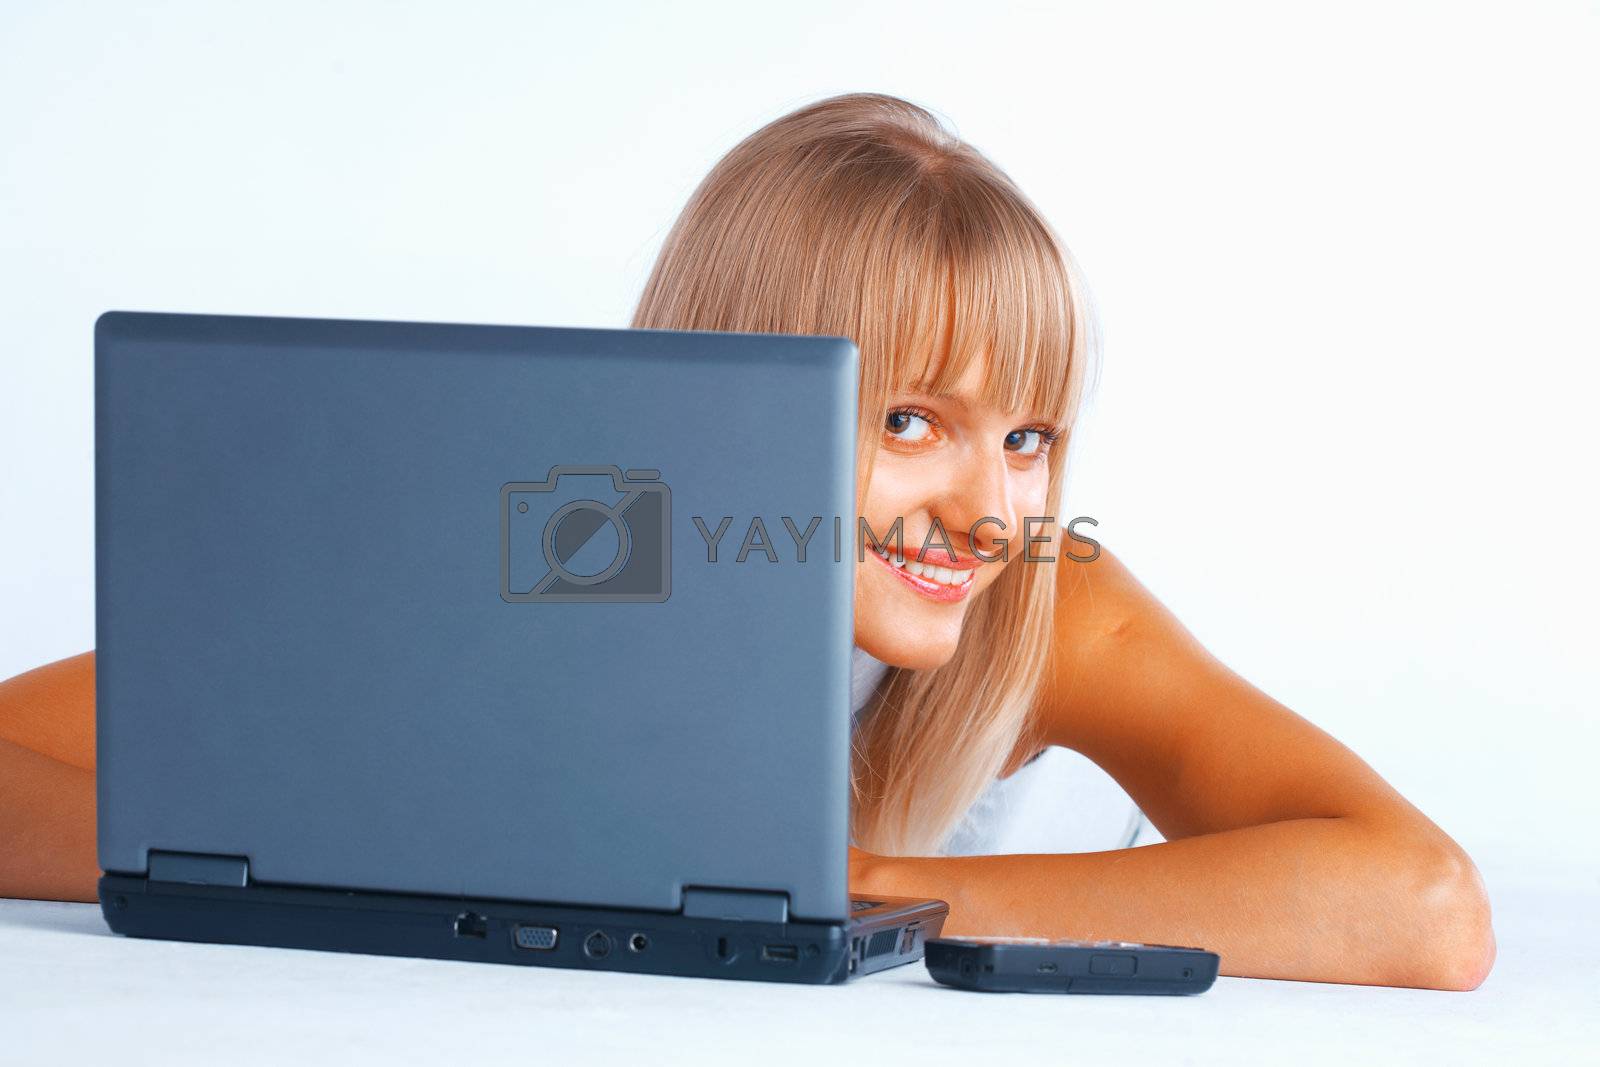 Royalty free image of Curious woman with laptop by romanshyshak